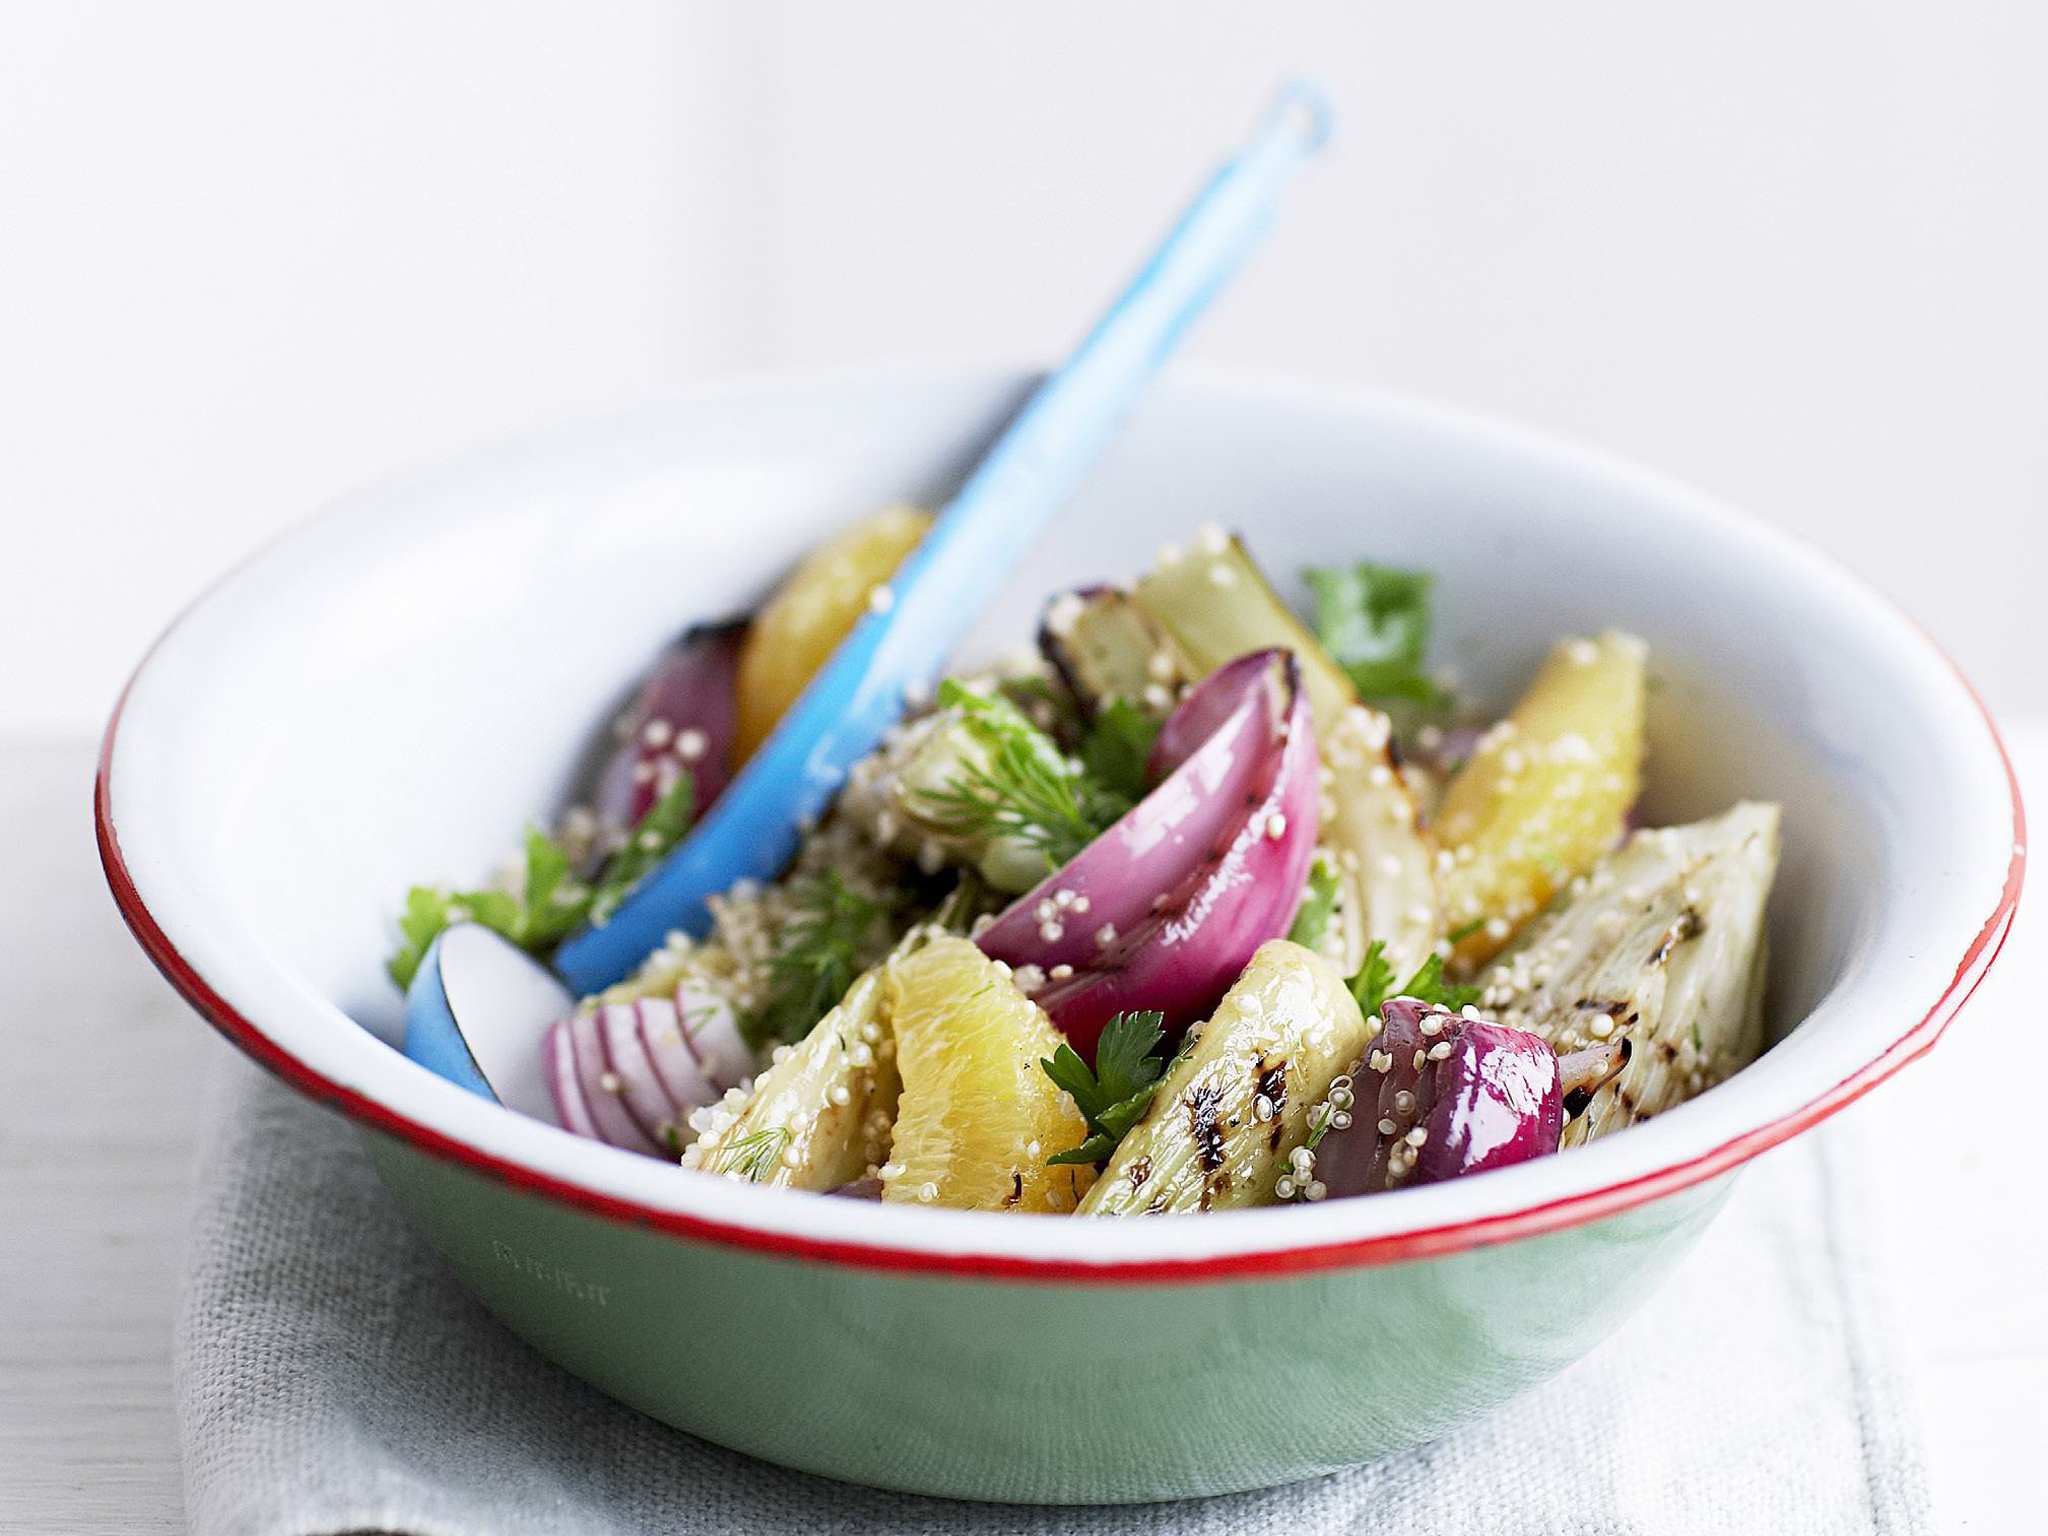 BARBECUED FENNEL, RED ONION AND ORANGE SALAD WITH QUINOA